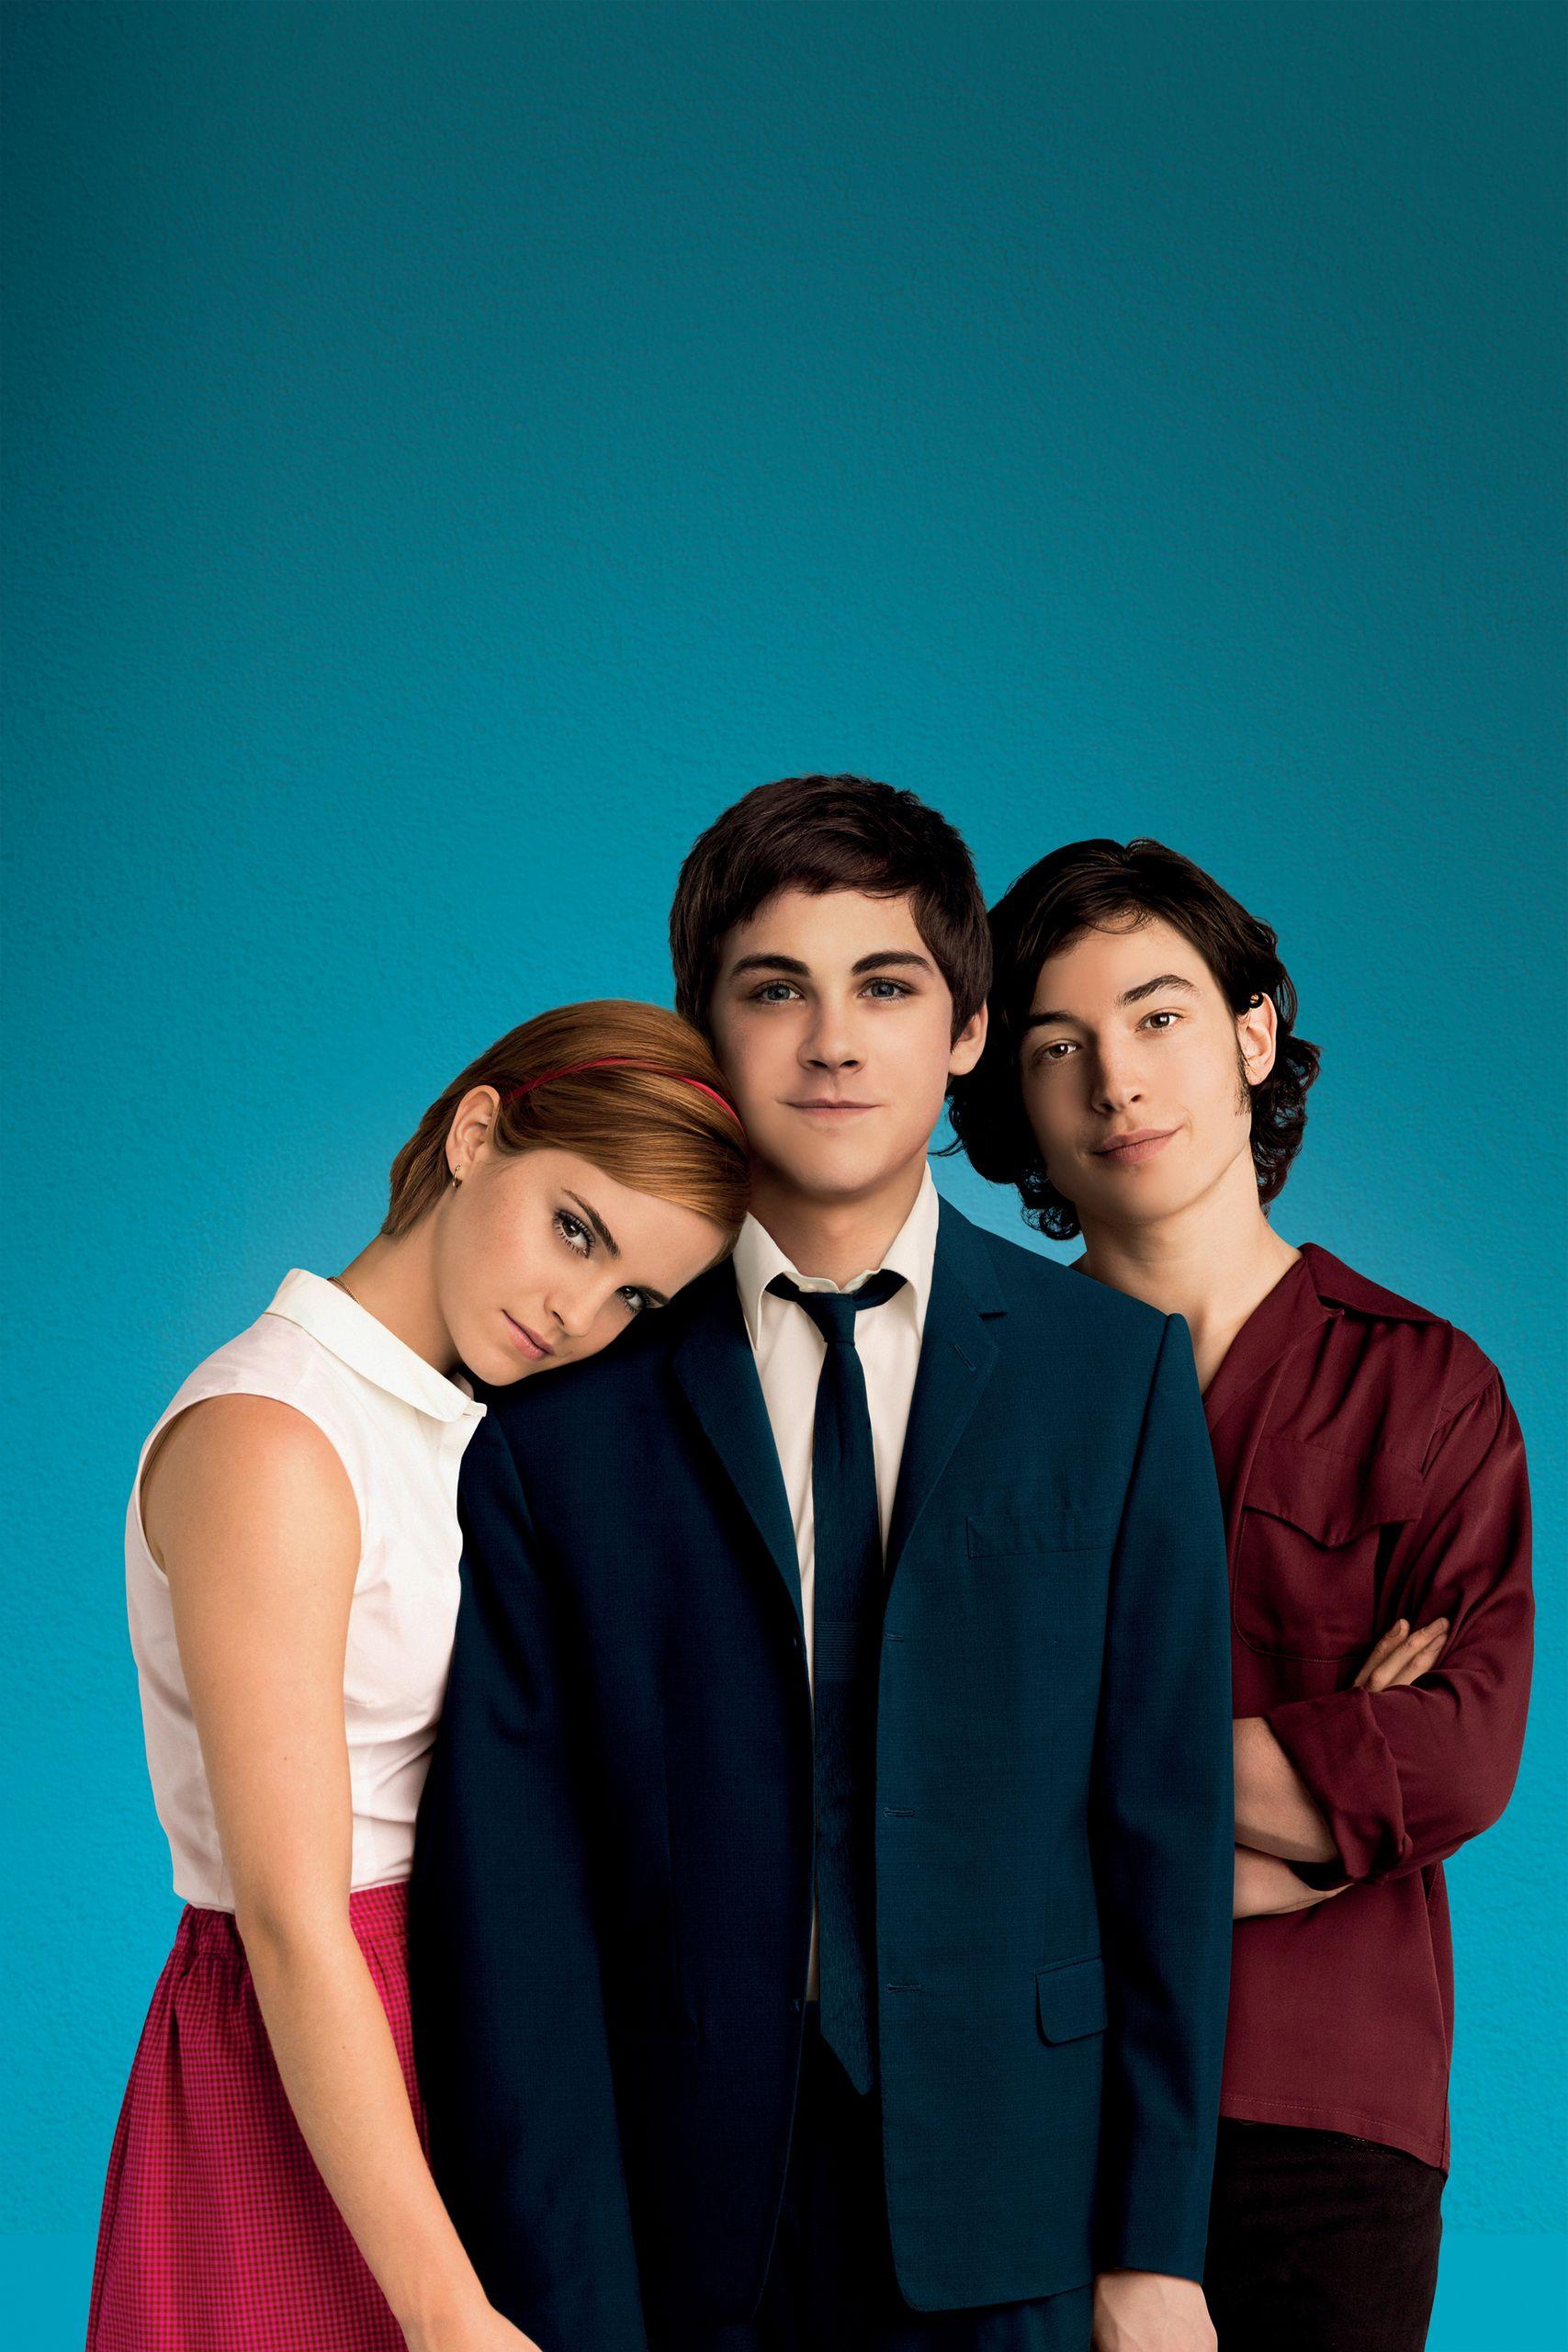 How Much Do You Know About The Perks Of Being A Wallflower?